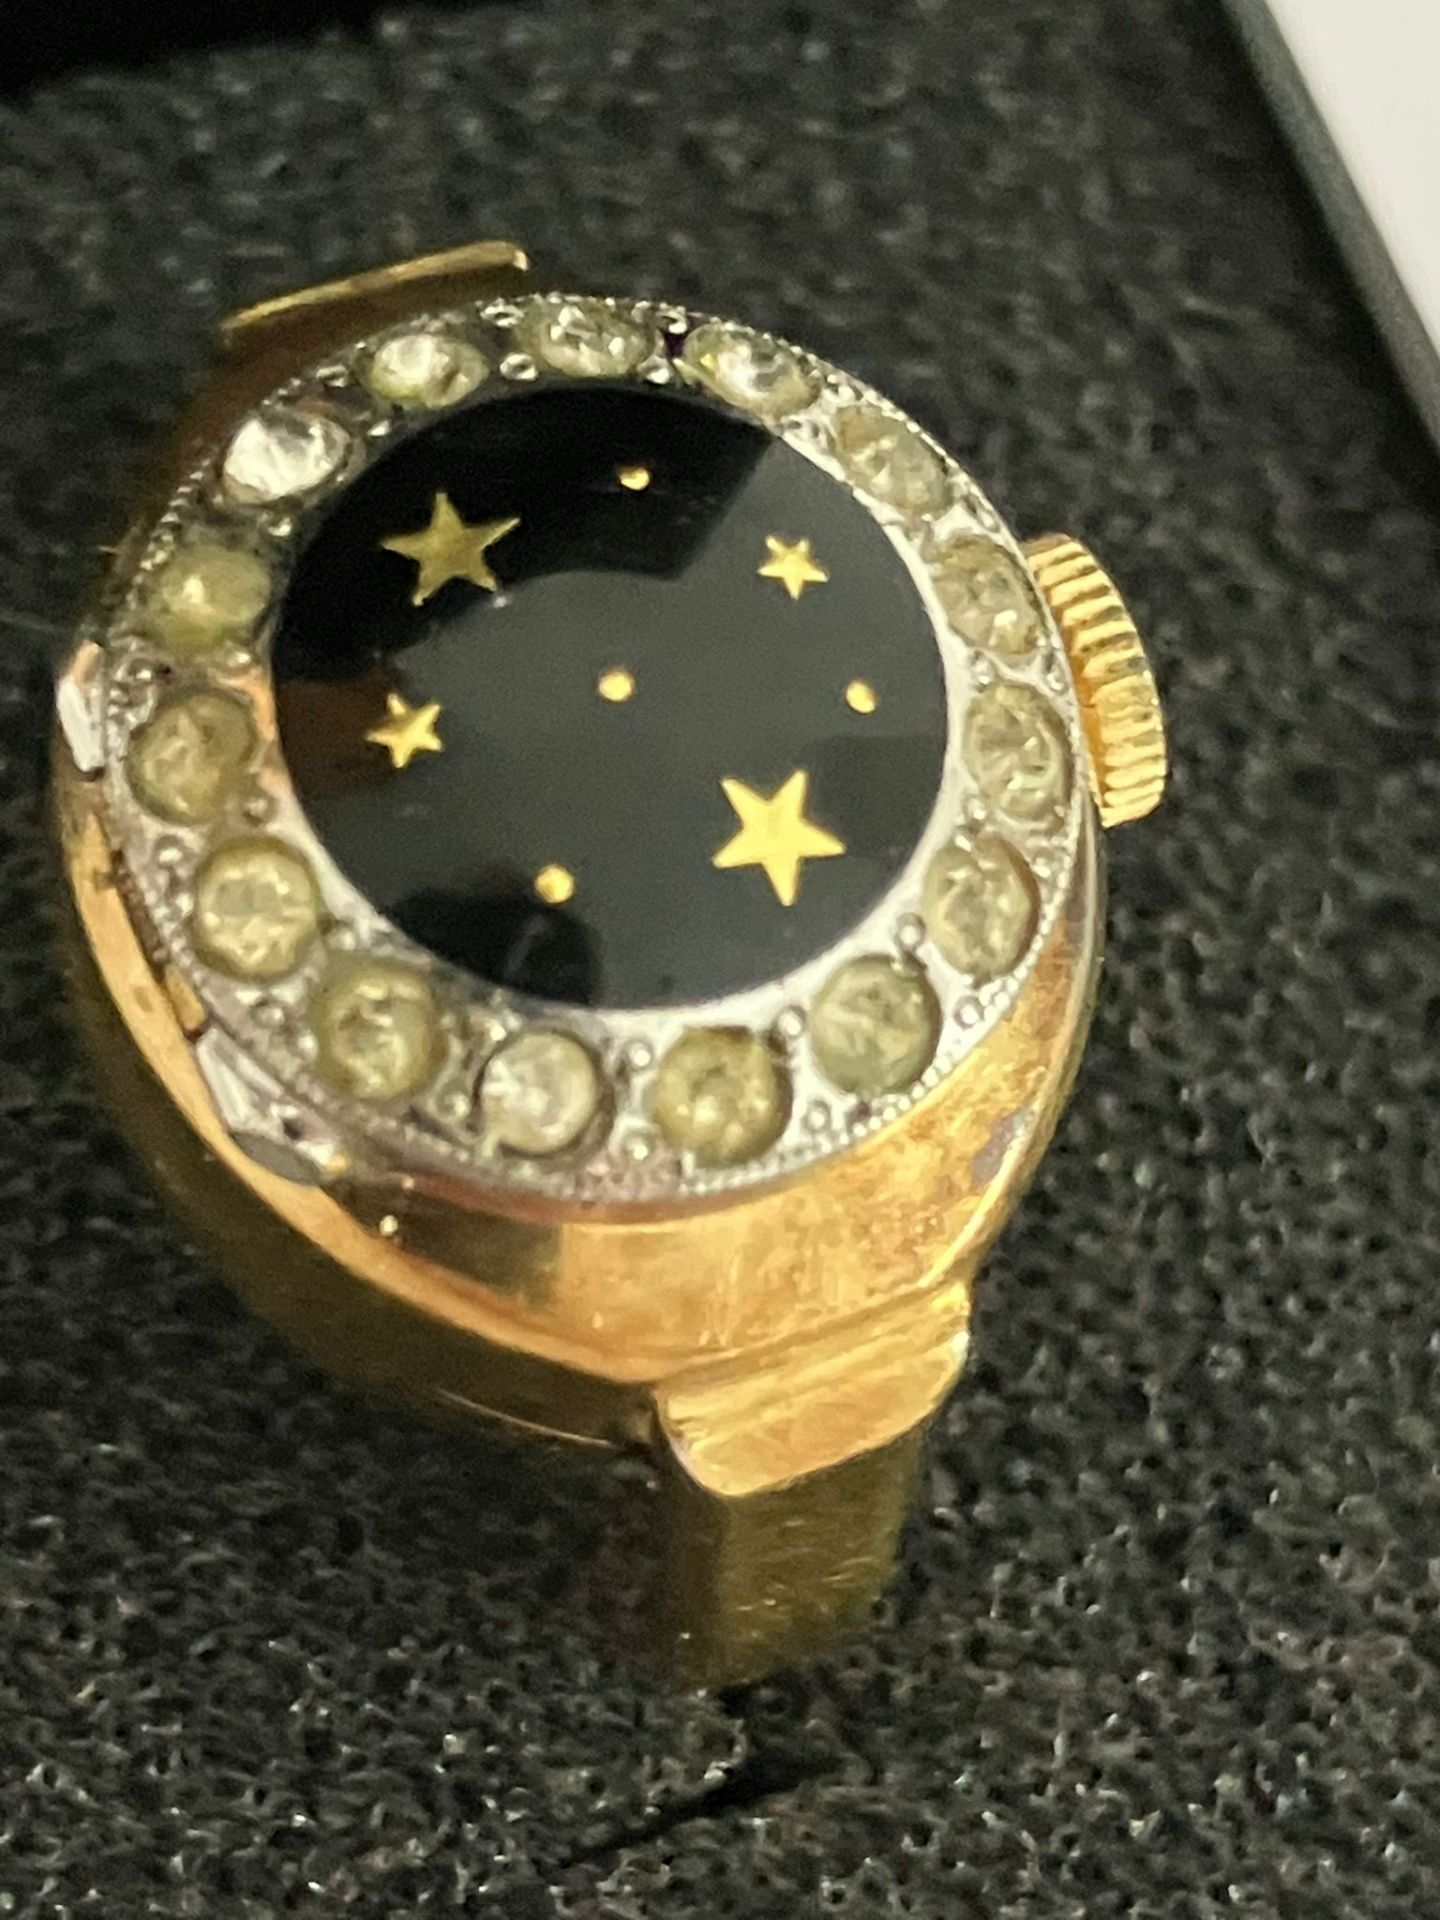 Ladies Beautiful Vintage GOLD PLATED (10 Microns) RITMA RING WATCH. Swiss made having jewelled bezel - Image 5 of 9